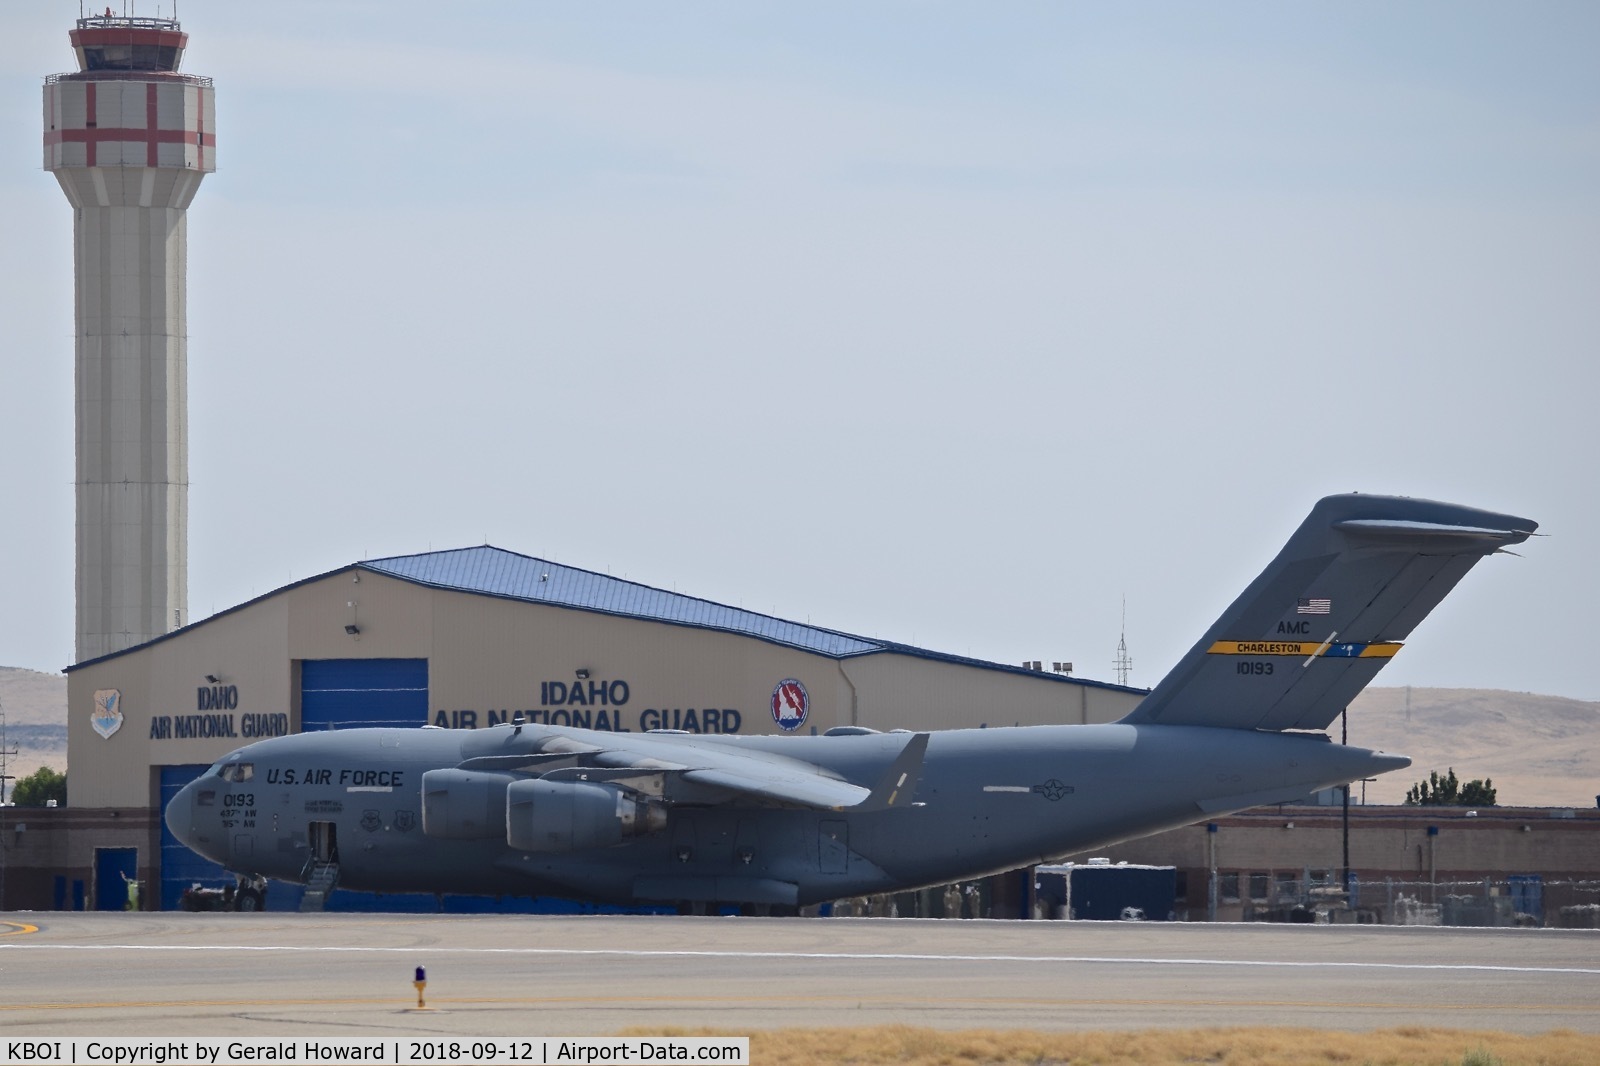 Boise Air Terminal/gowen Fld Airport (BOI) - C-17A from Charleston AFB, SC parked on the Idaho ANG ramp.